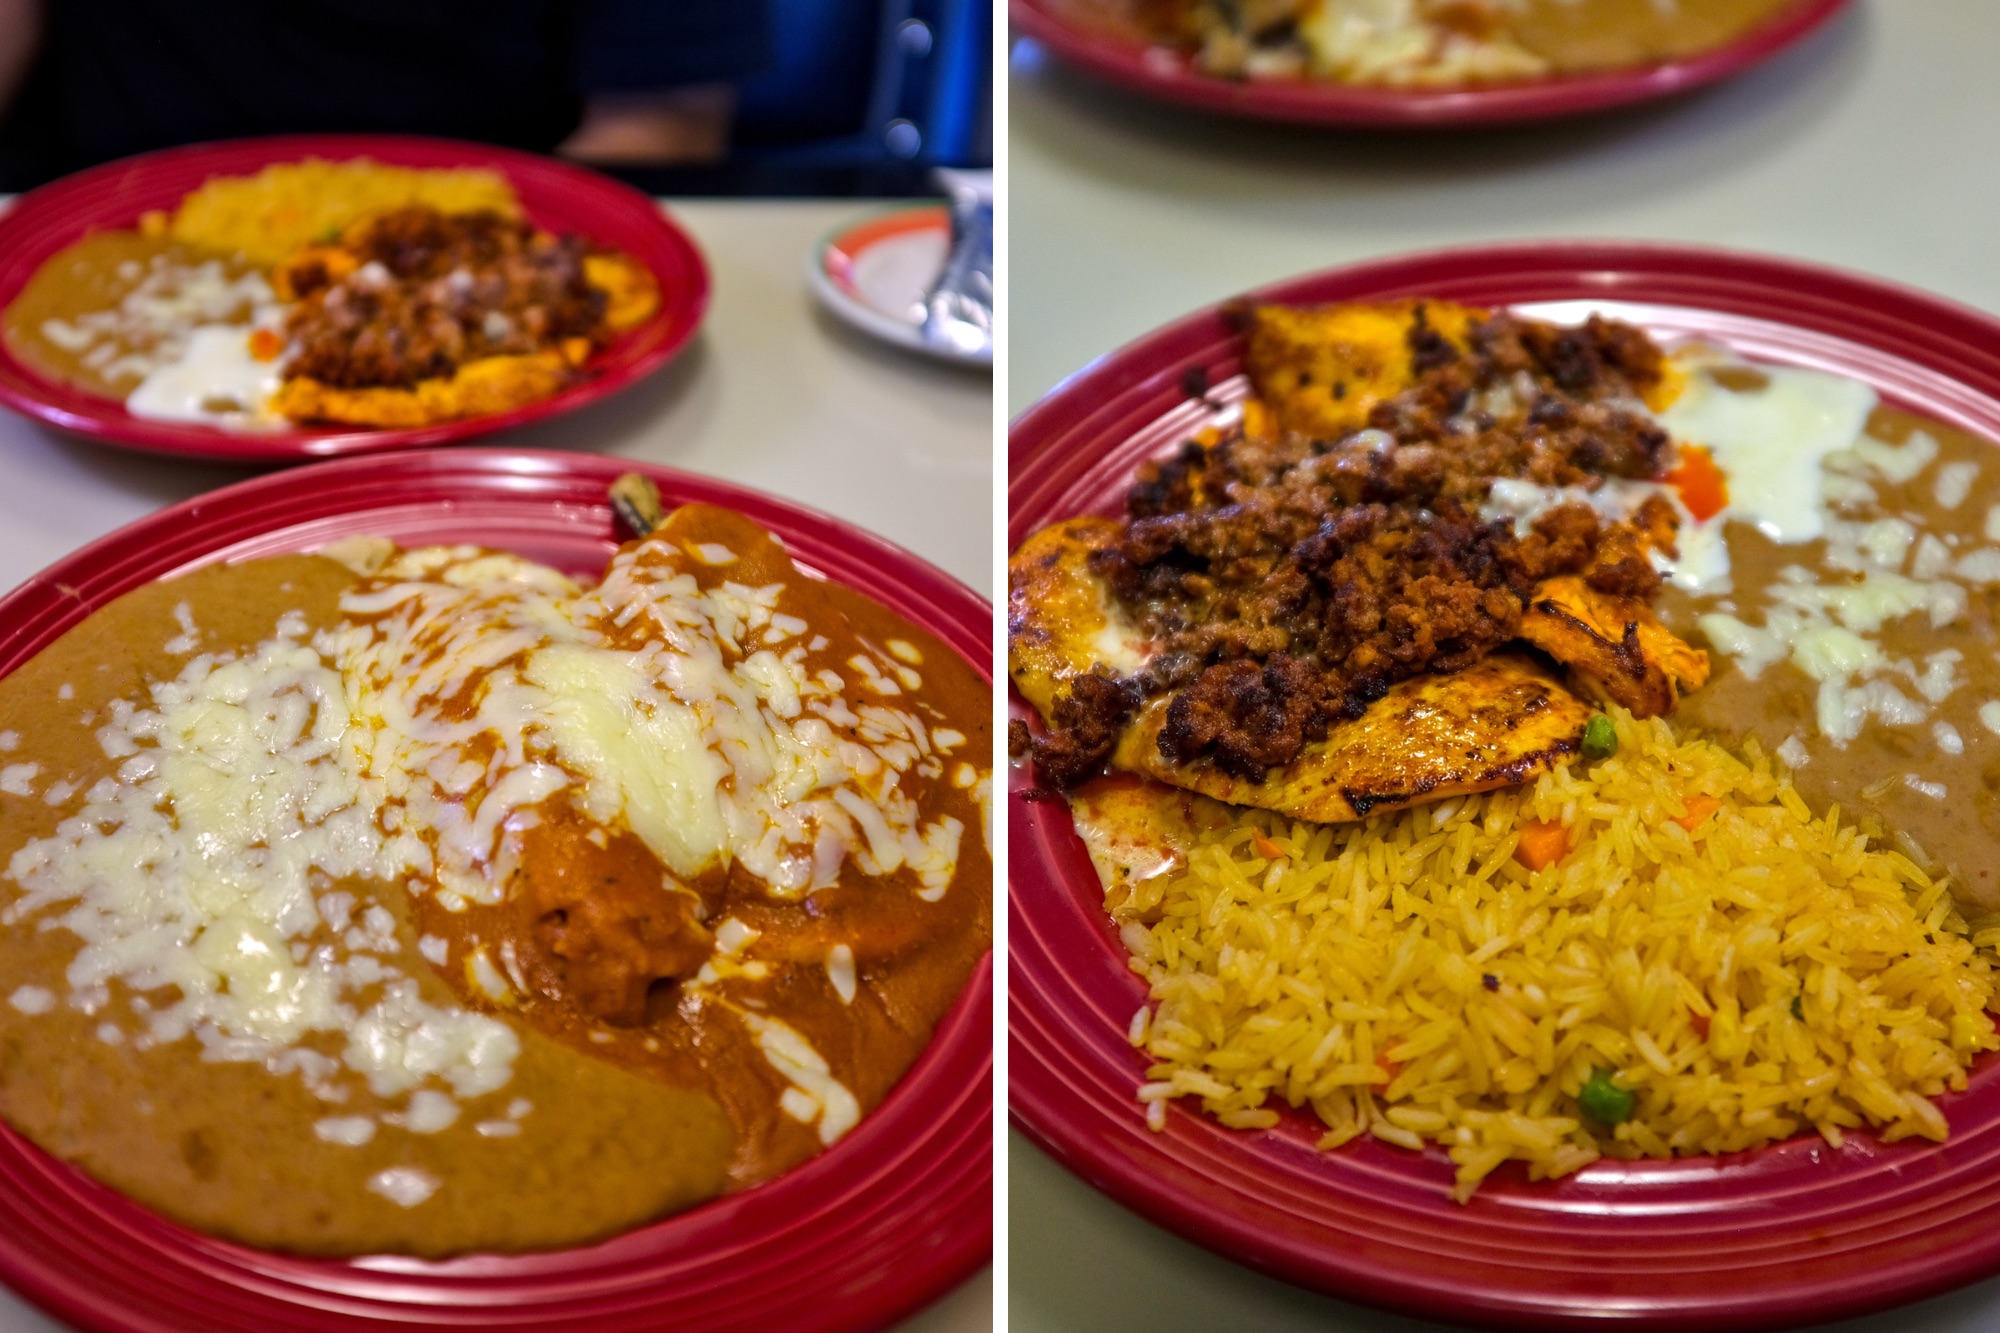 Two lunch plates from Mexico Viejo